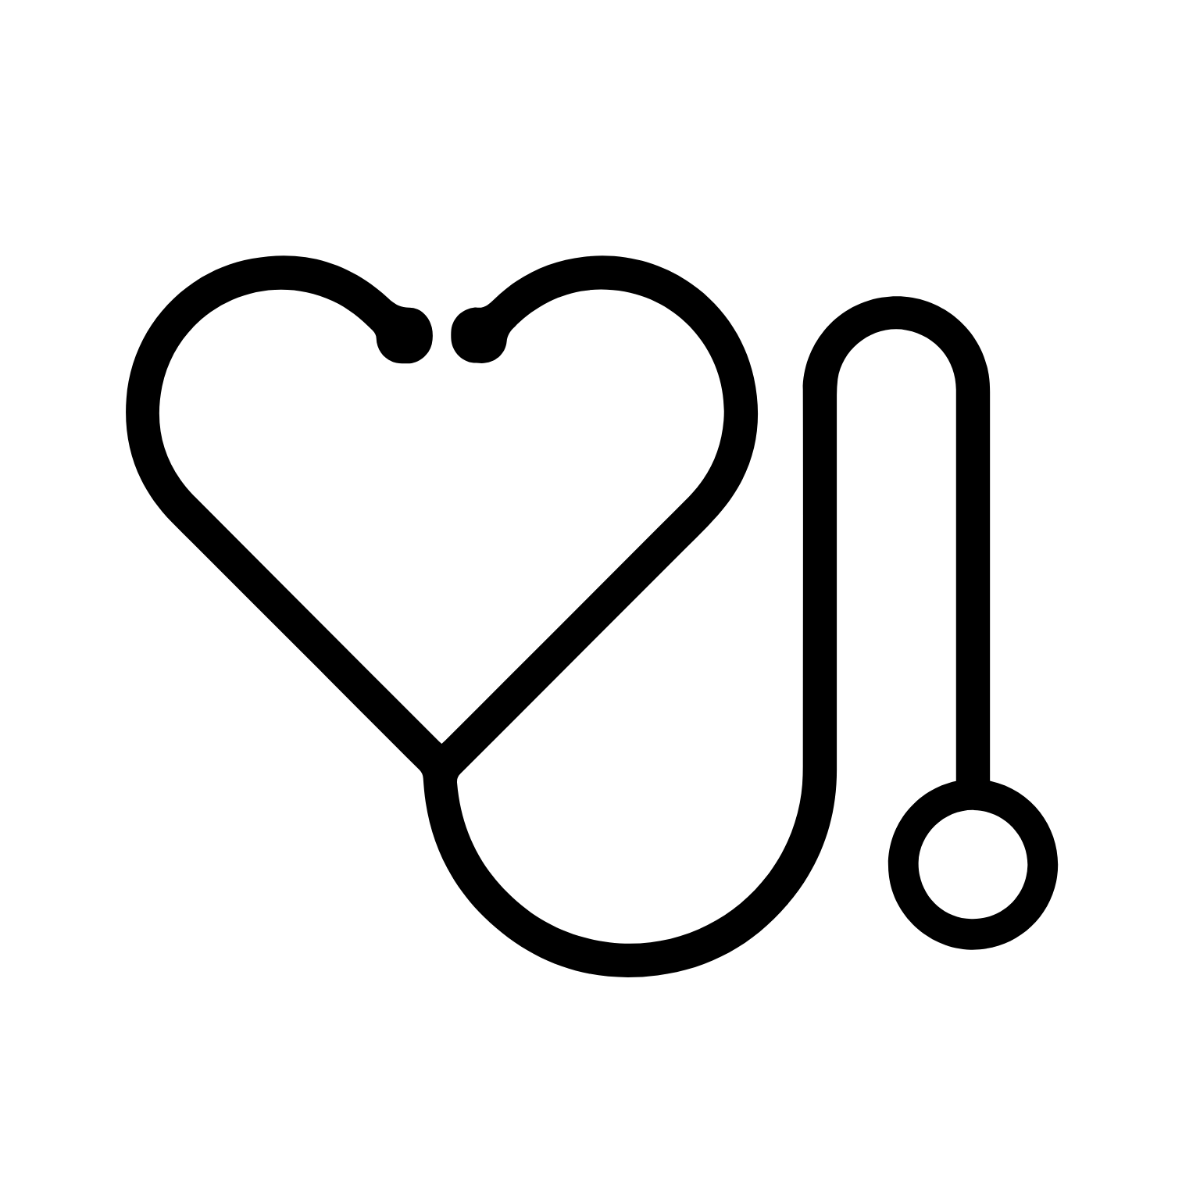 Heart Stethoscope Clipart Black and White